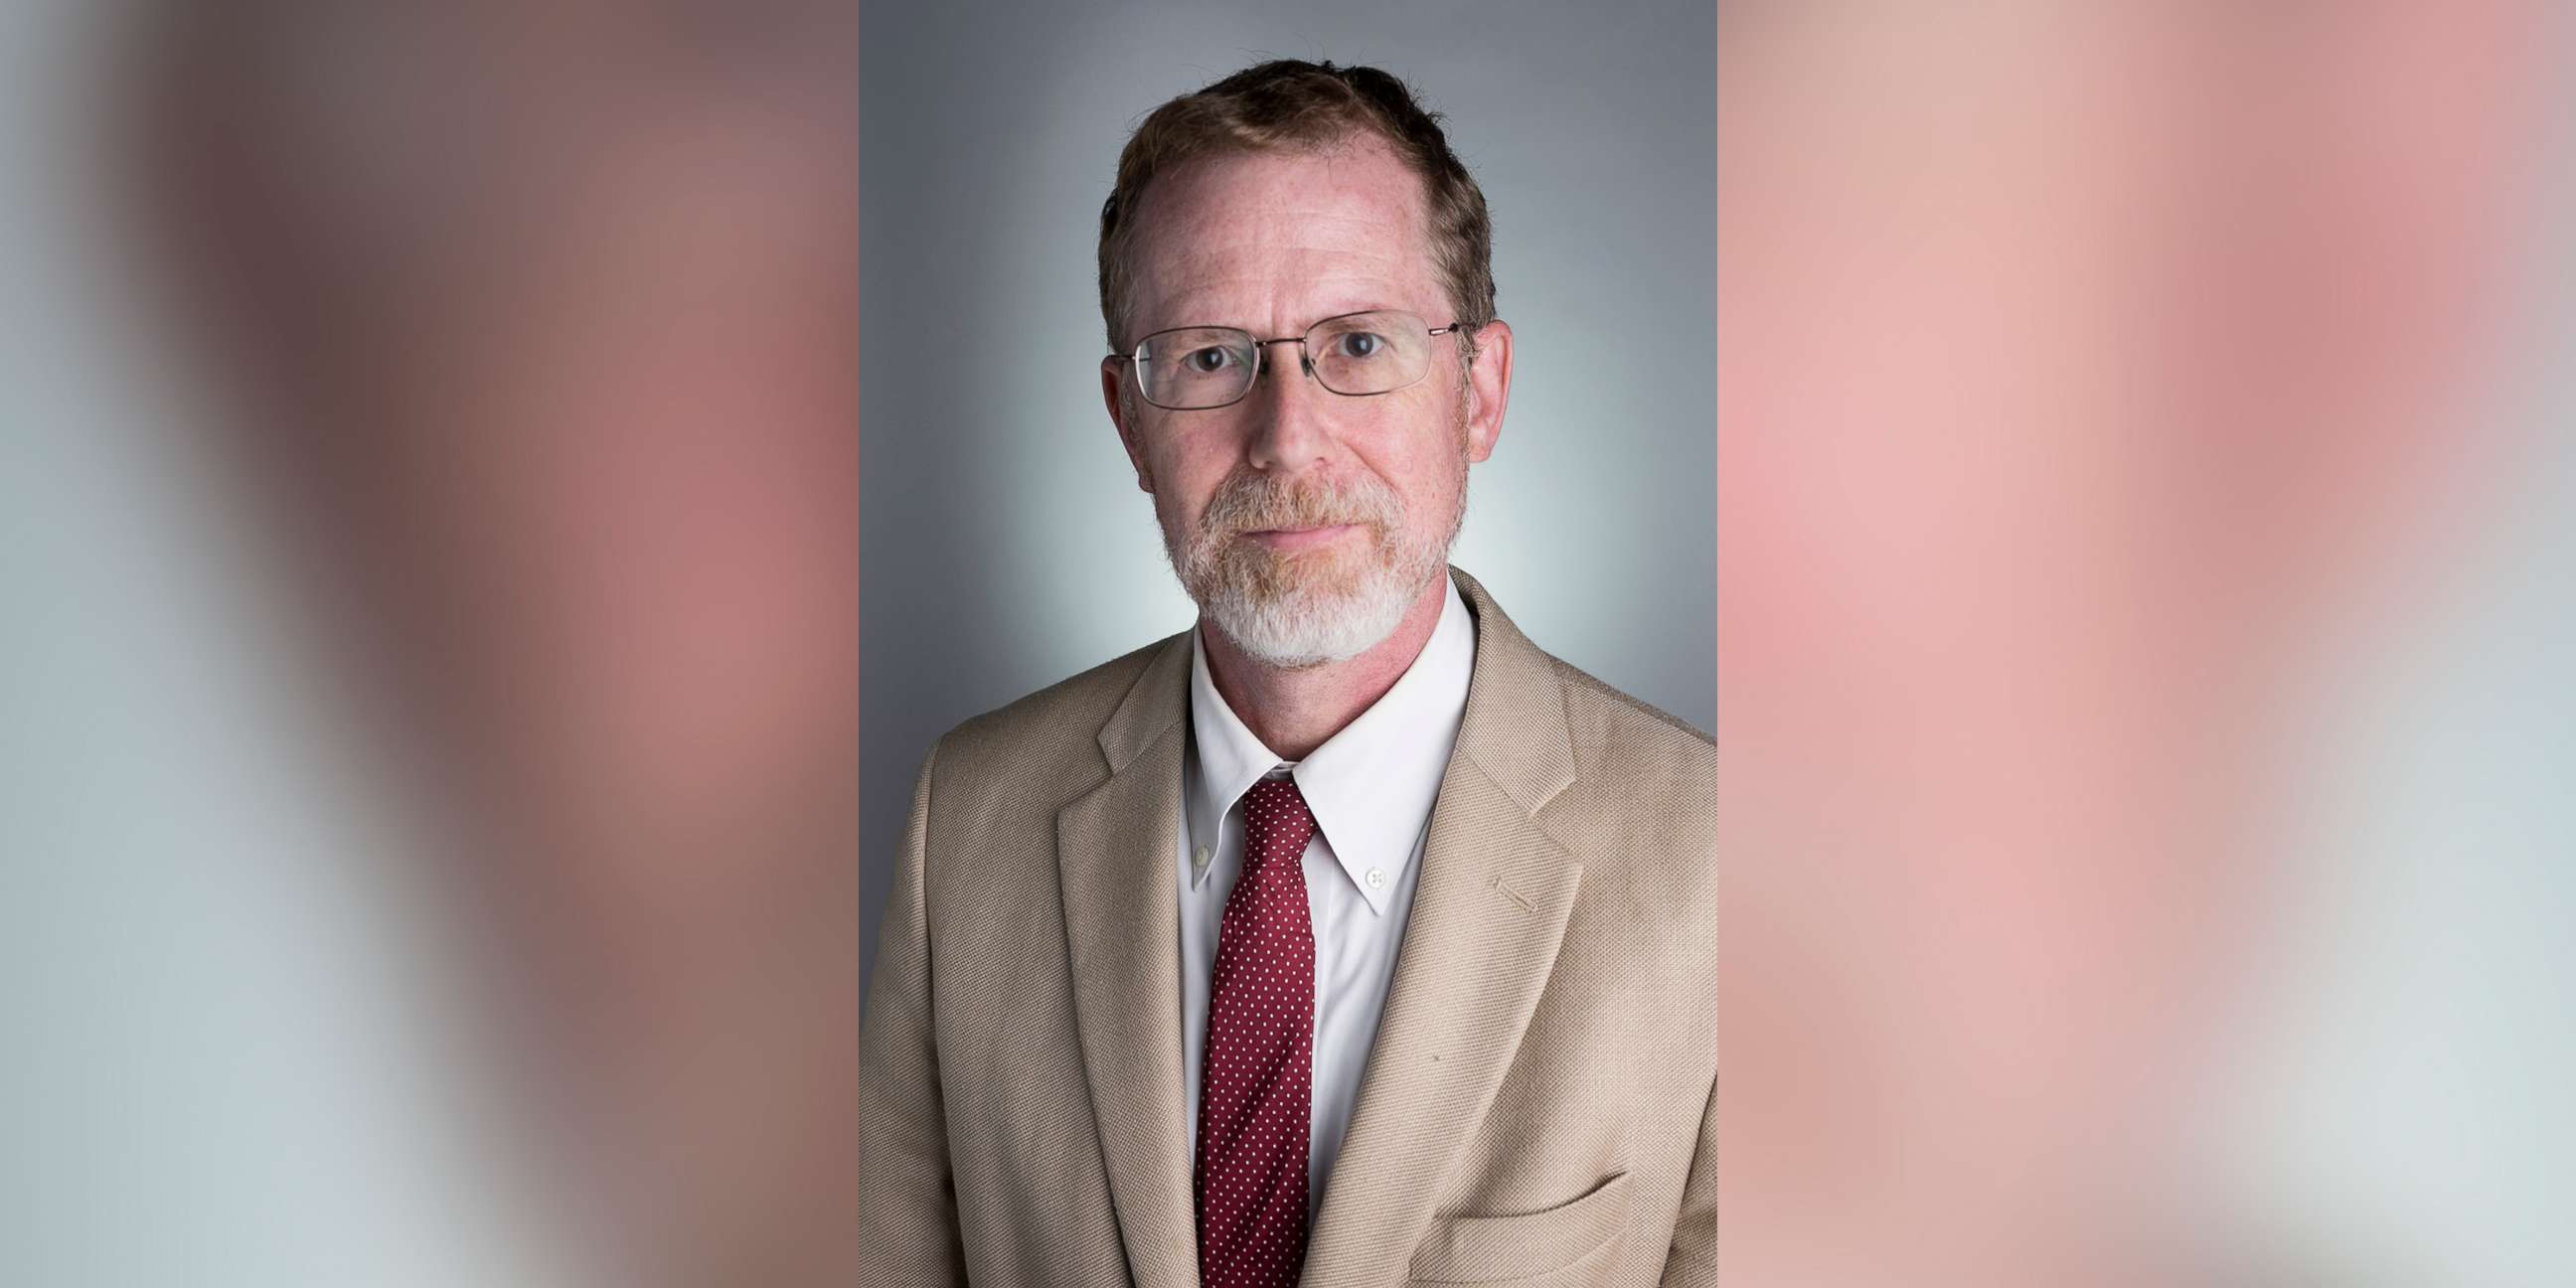 PHOTO: Indiana University business school professor Eric Rasmusen has come under fire for posting comments on social media that school executive vice president Lauren Robel described as "racist, sexist and homophobic."